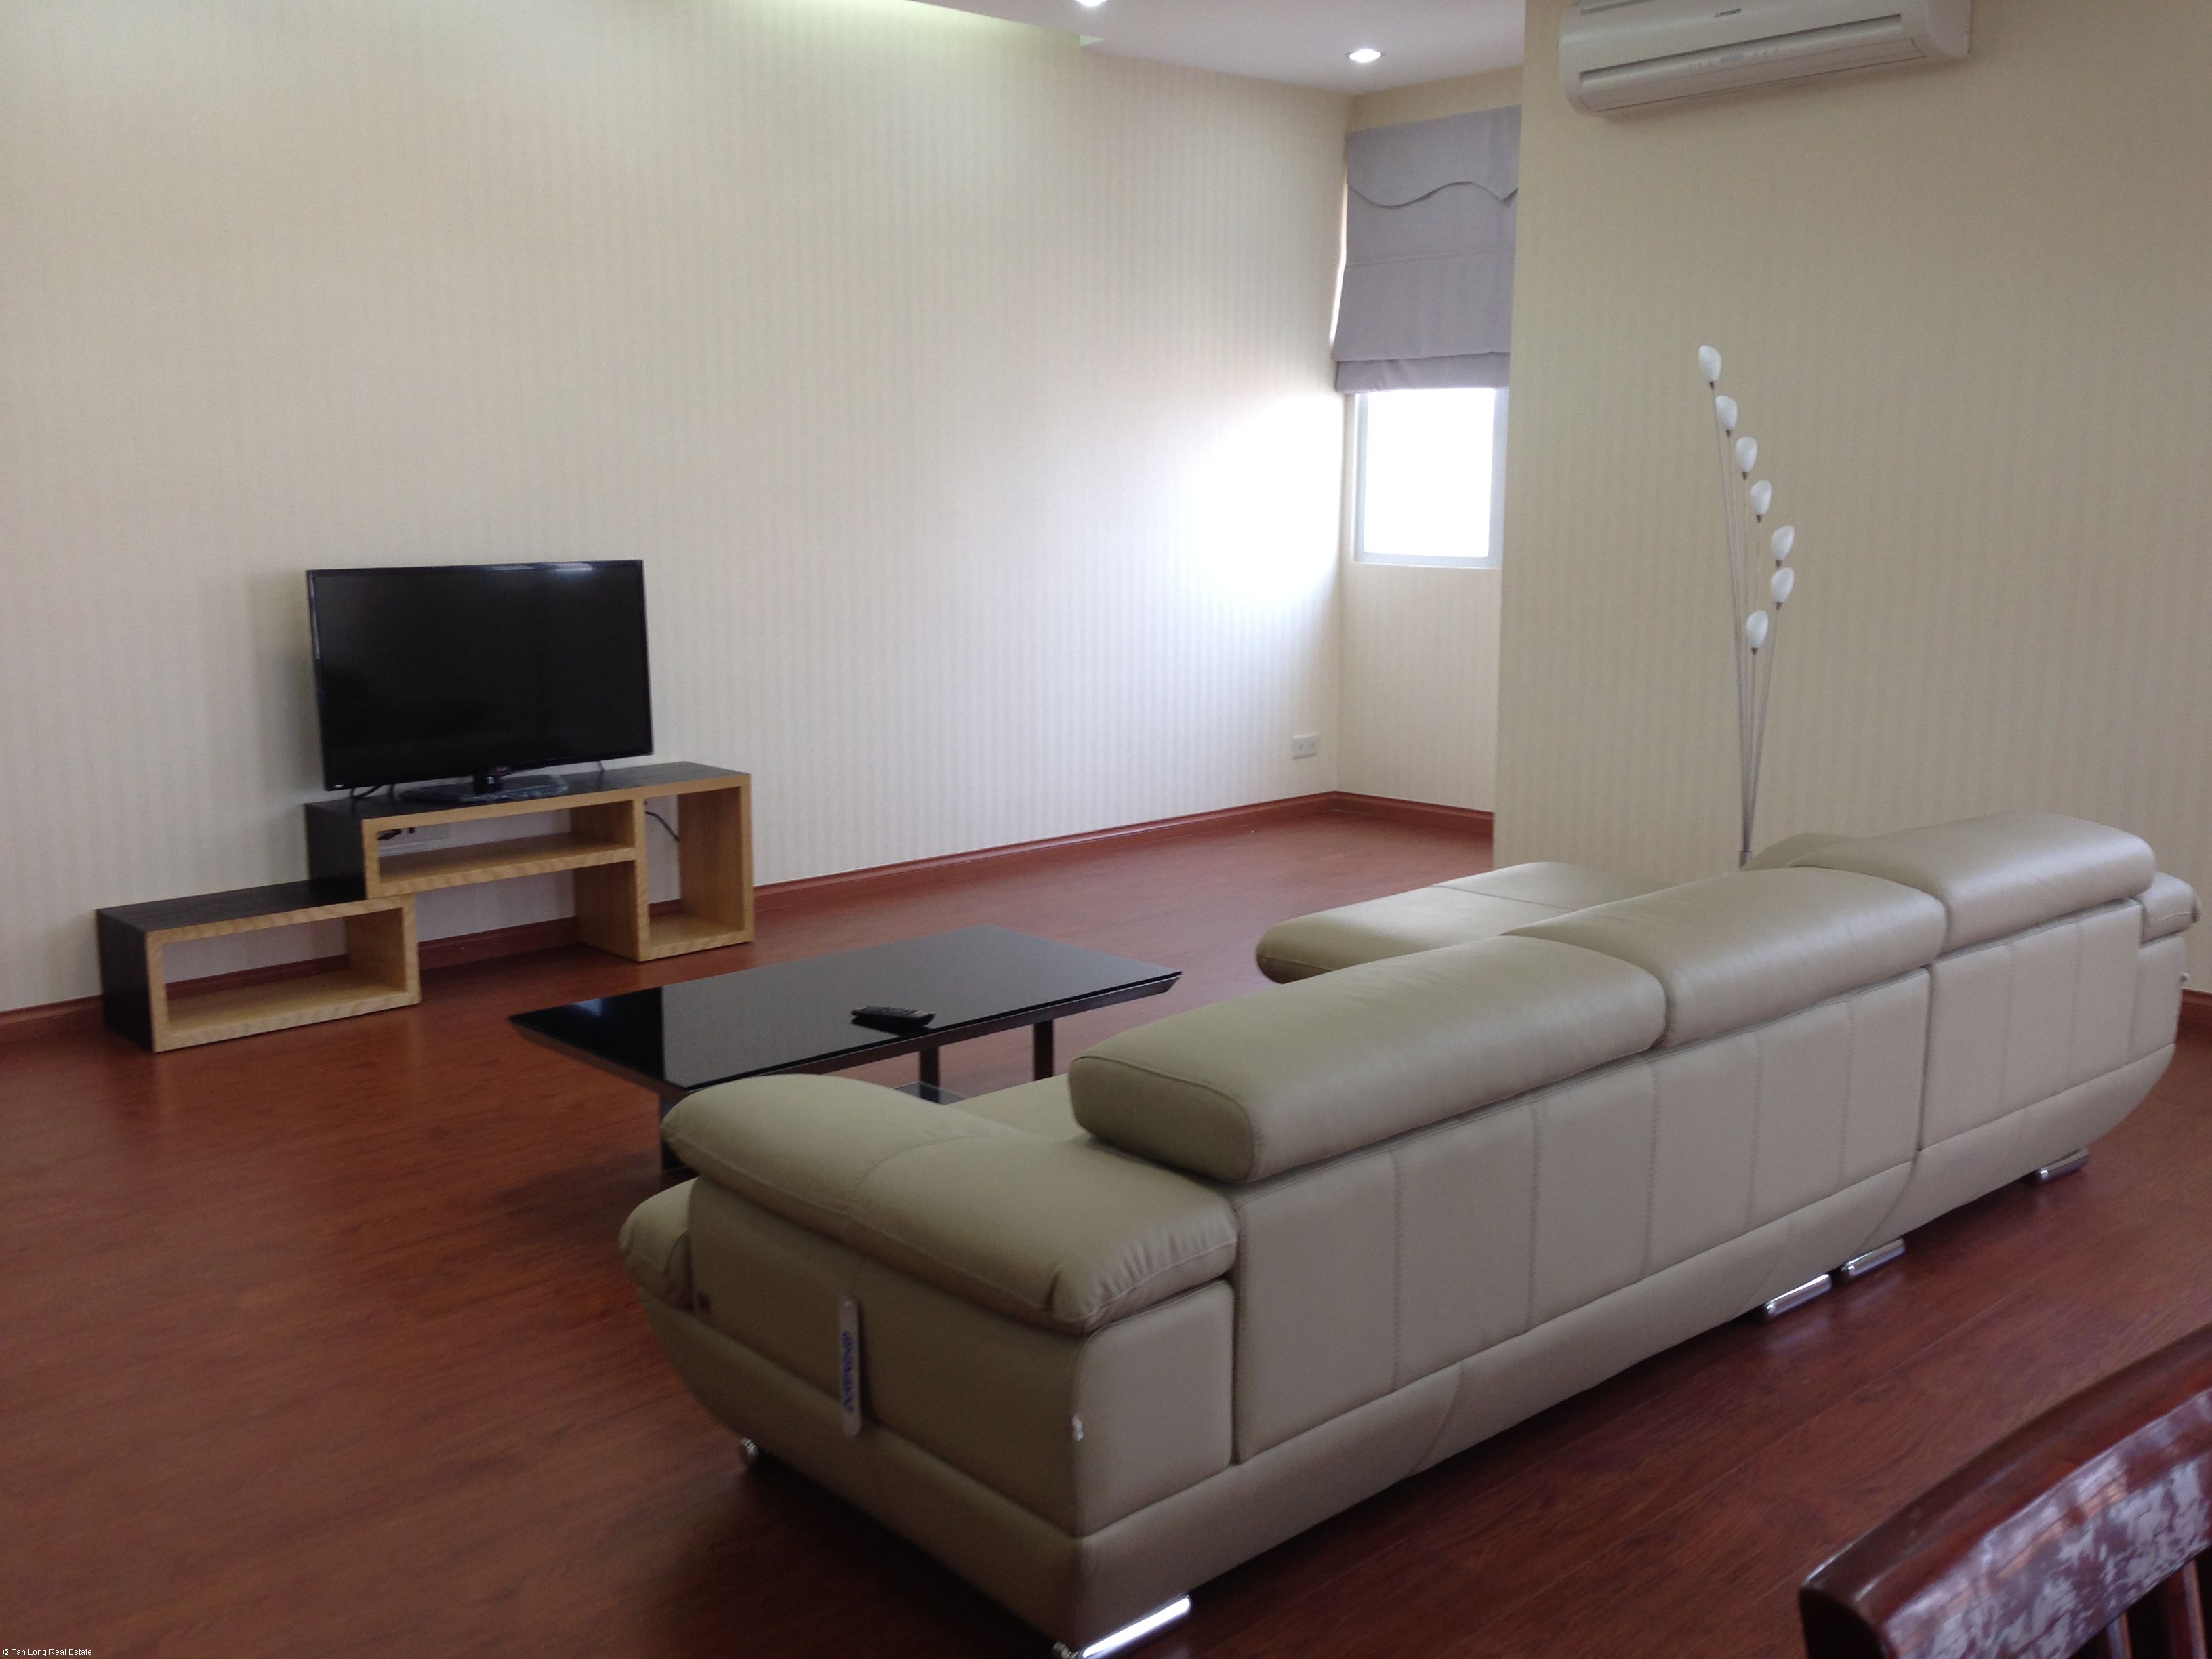 Spacious 3 bedroom apartment for rent in Trung Yen Plaza, Tran Duy Hung street, Cau Giay district, Hanoi 1